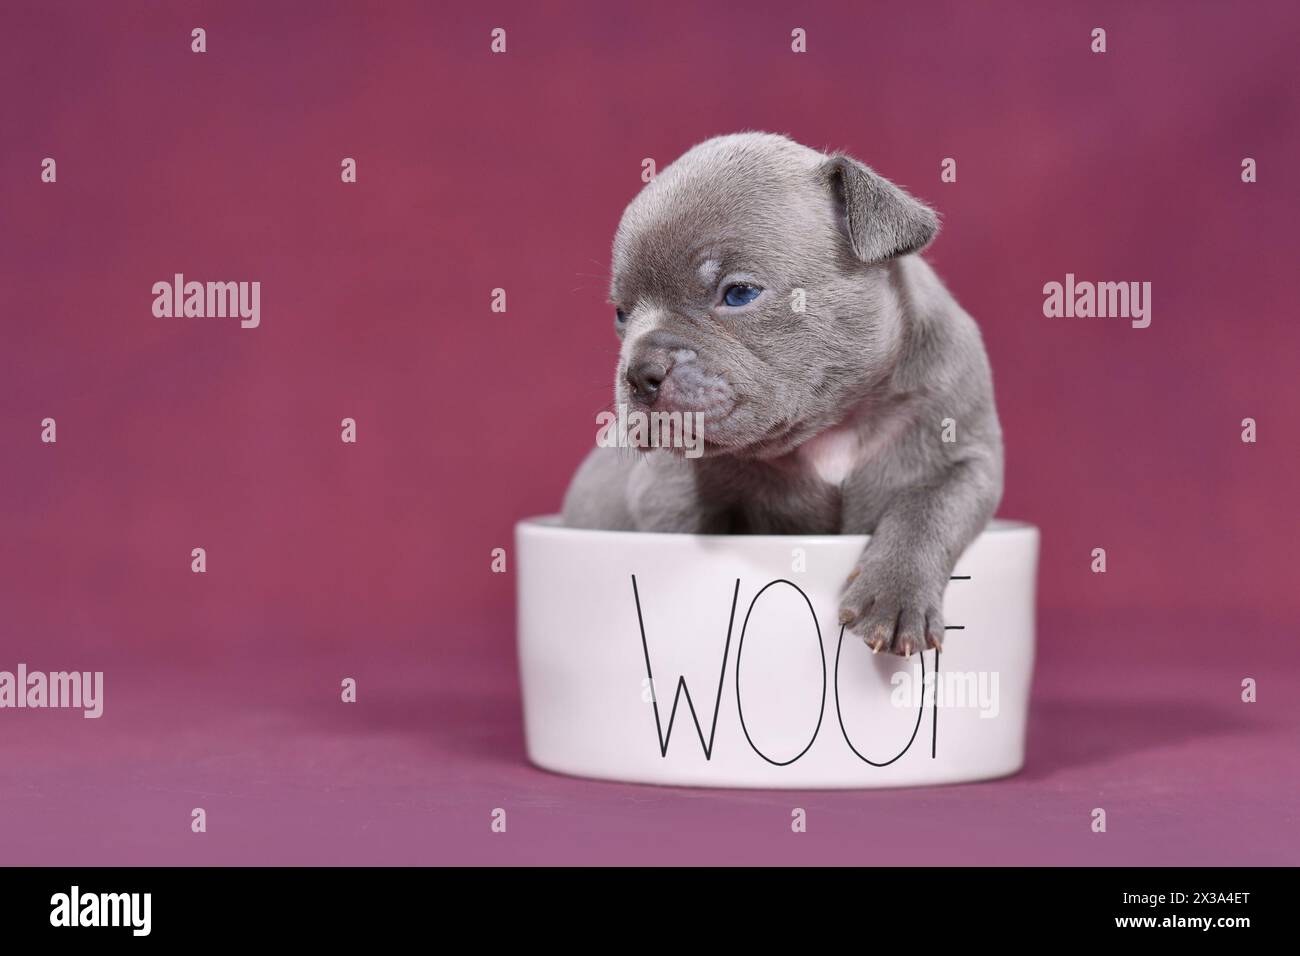 Four weeks young purebredFrench Bulldog puppy in dog bowl with text 'The Boss' Stock Photo